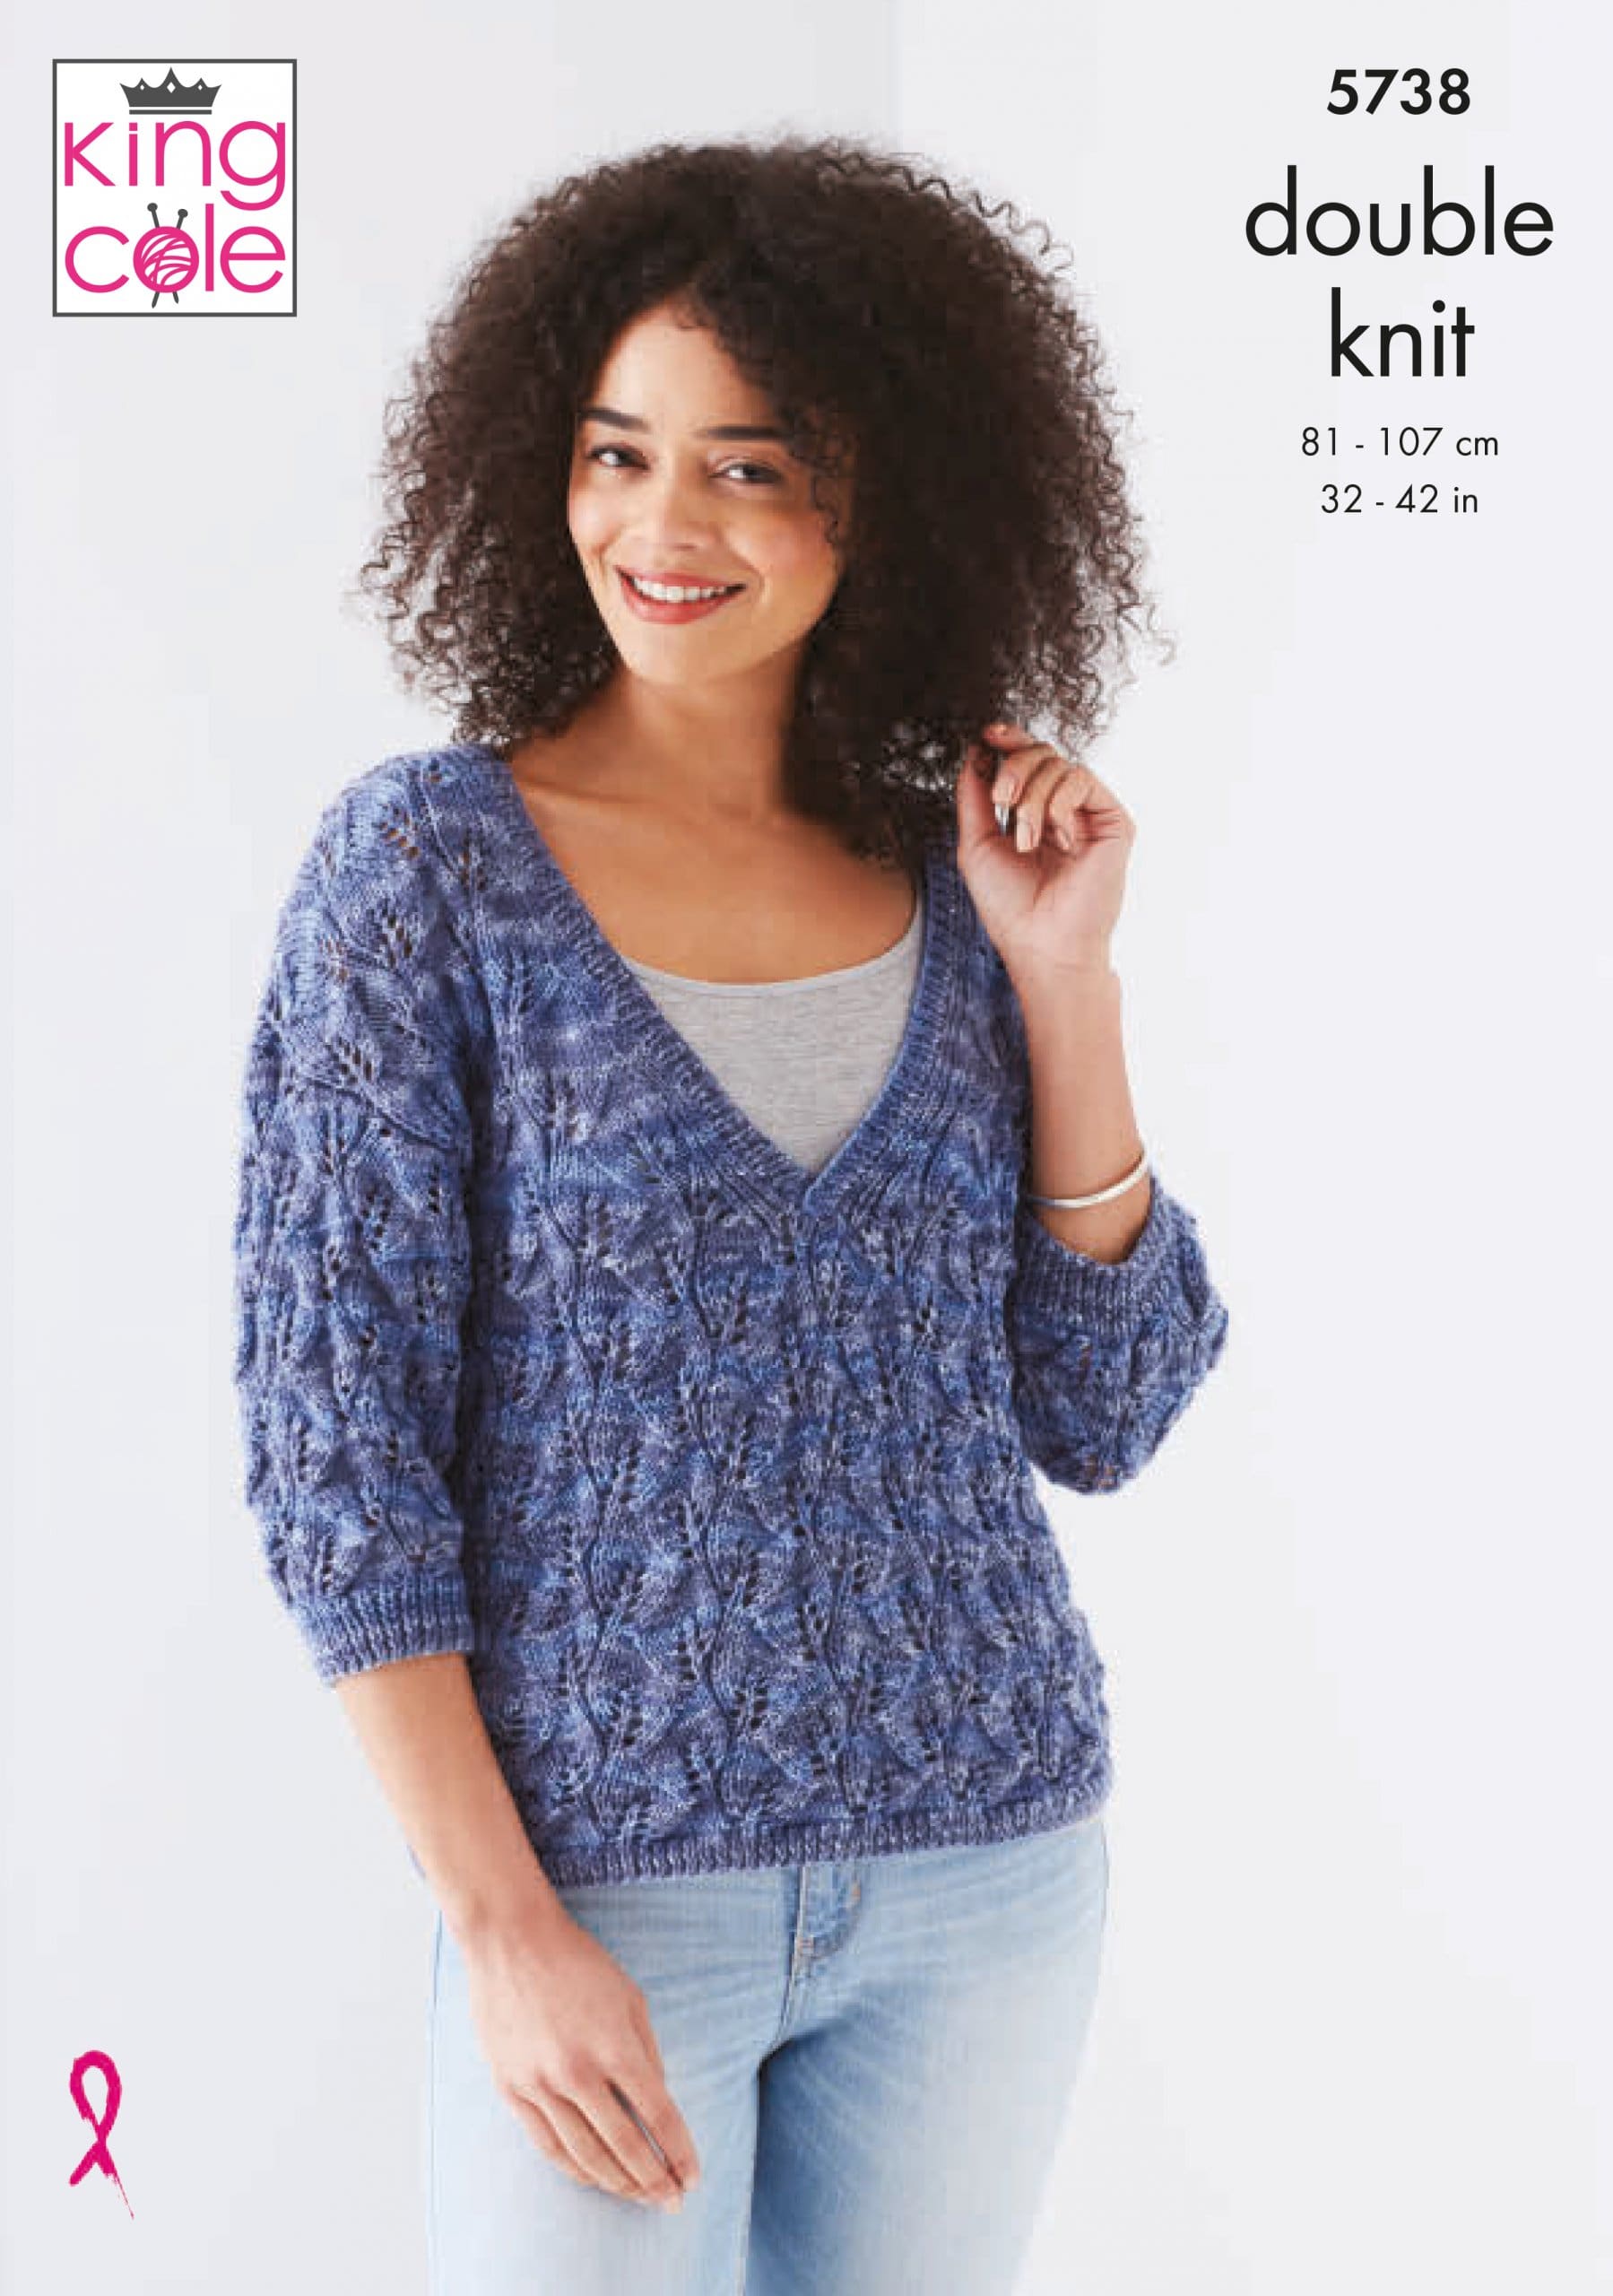 Easy to Follow Sweaters Knitted in Island Beaches DK Knitting Patterns ...